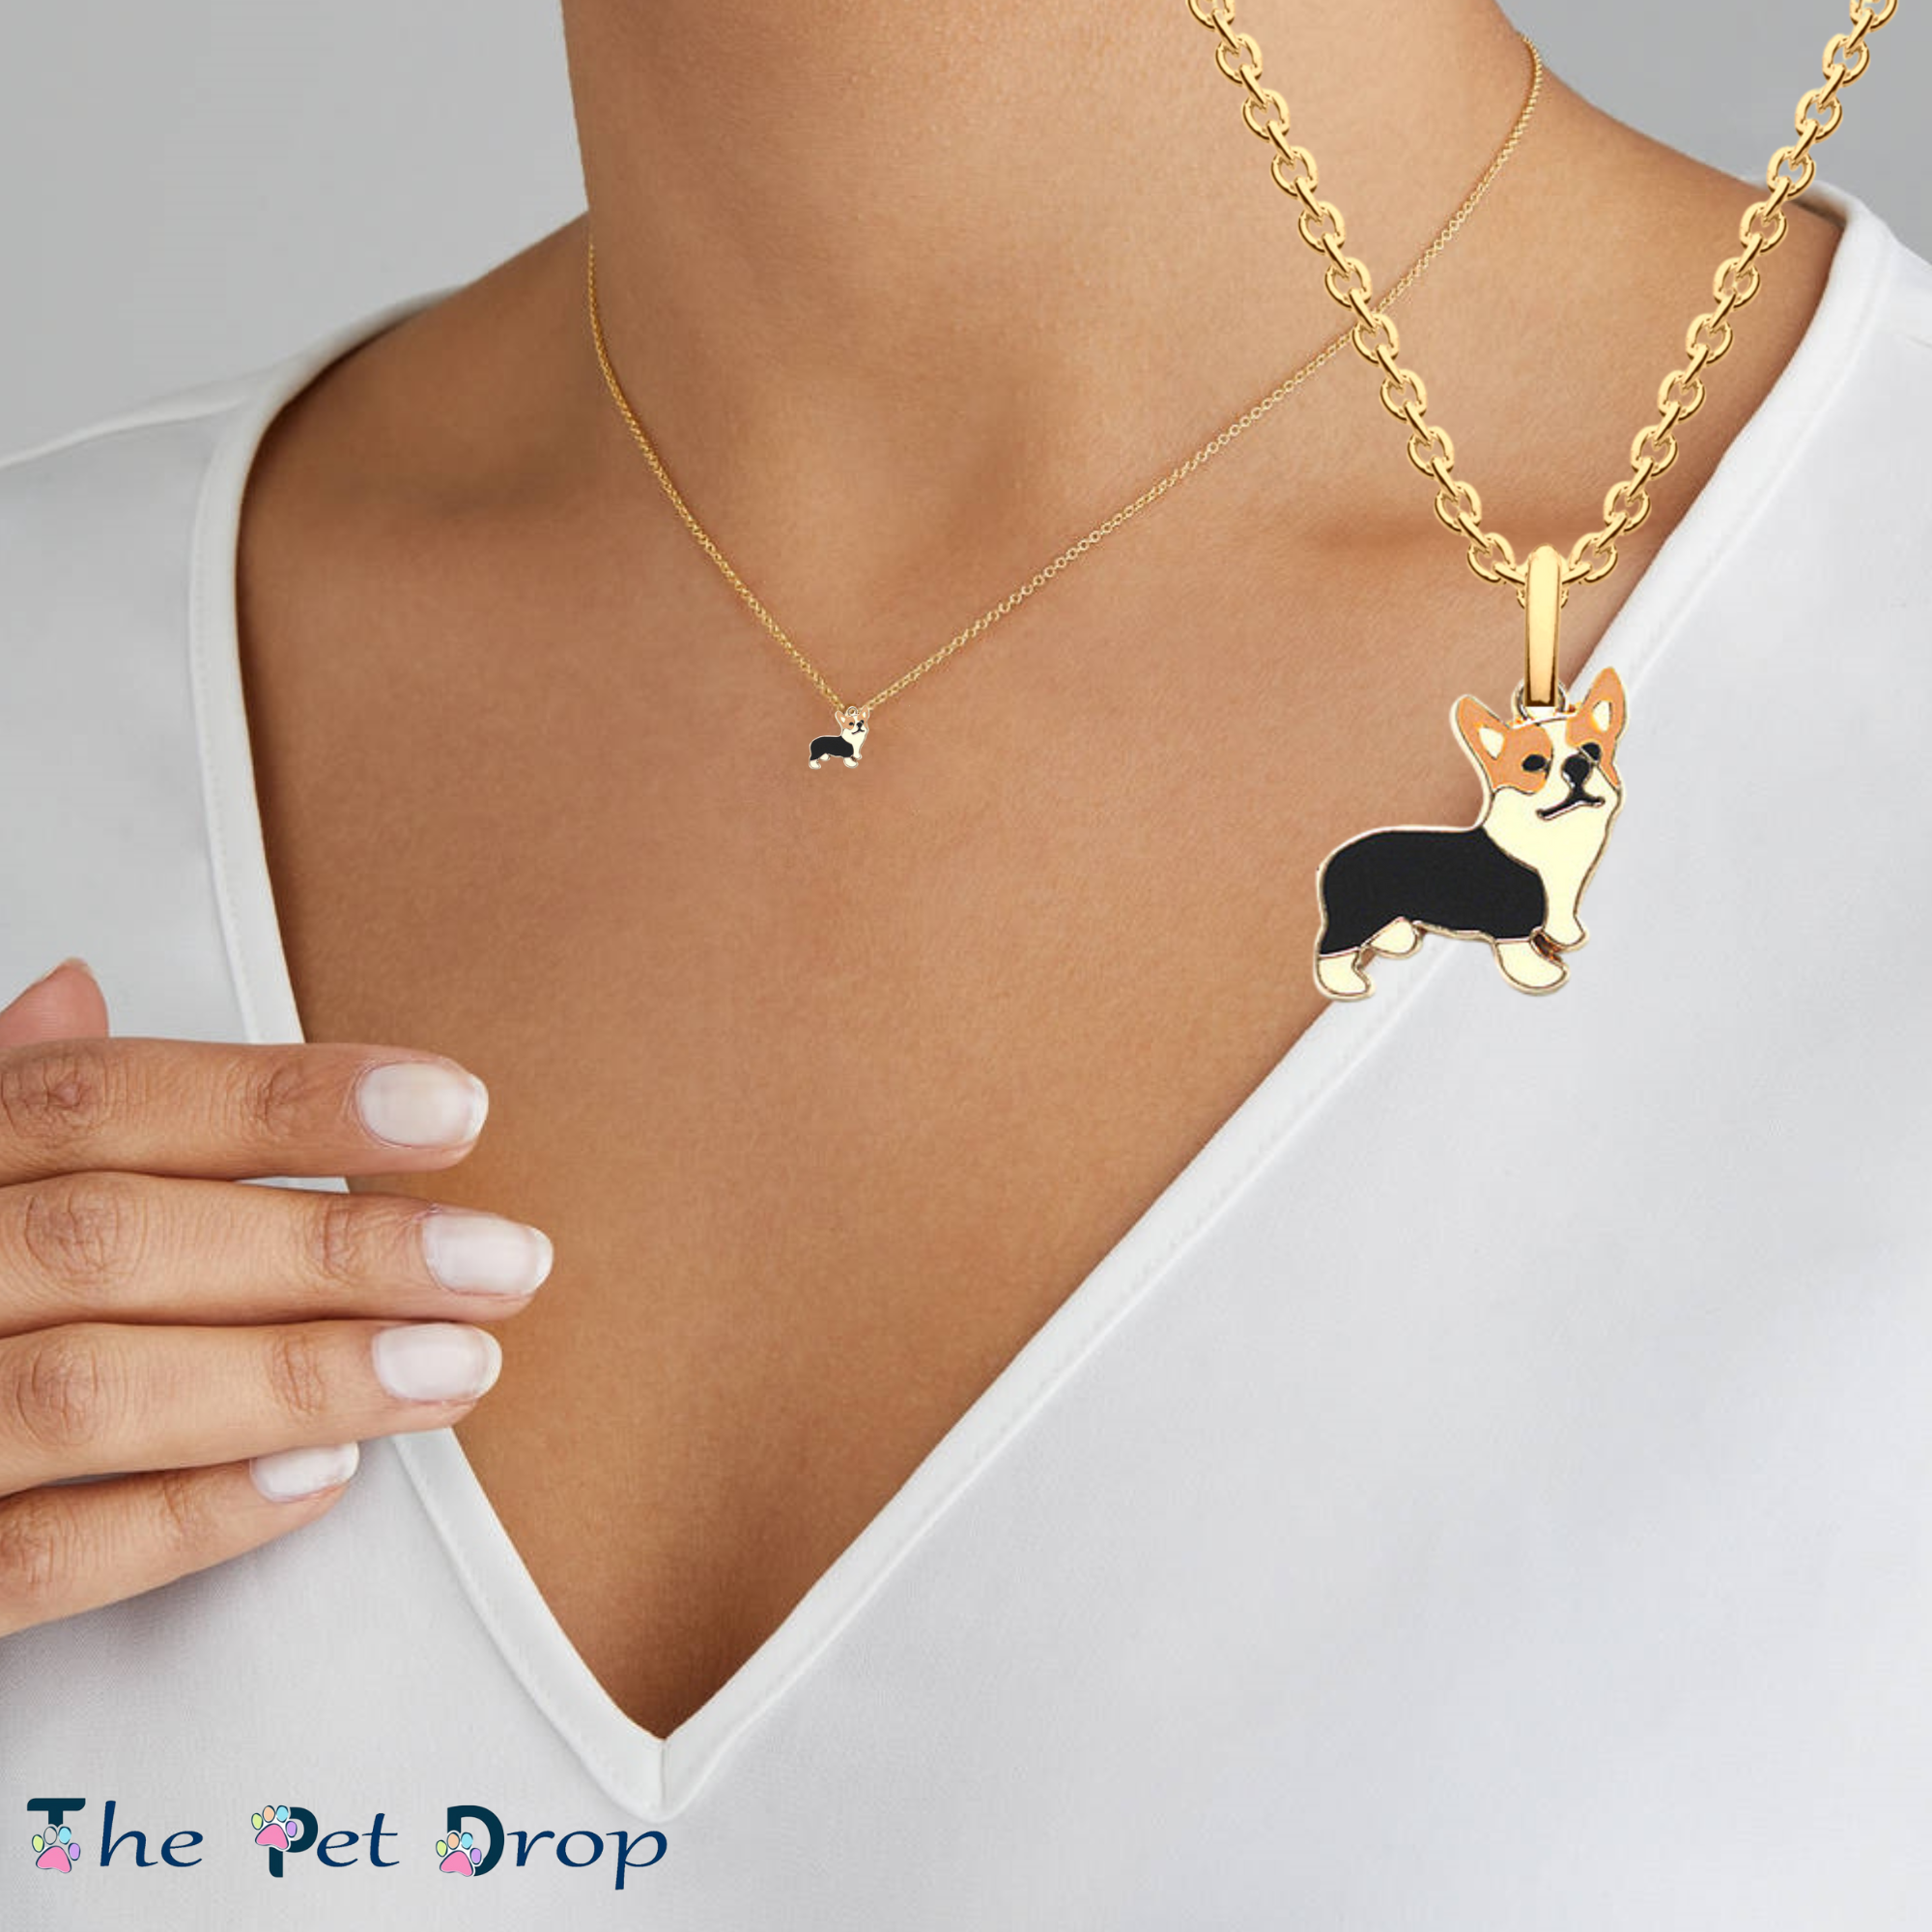 brown, black and white corgi pendant hanging on a gold chain with a gold outlined around the corgi pendant on a woman's neck.